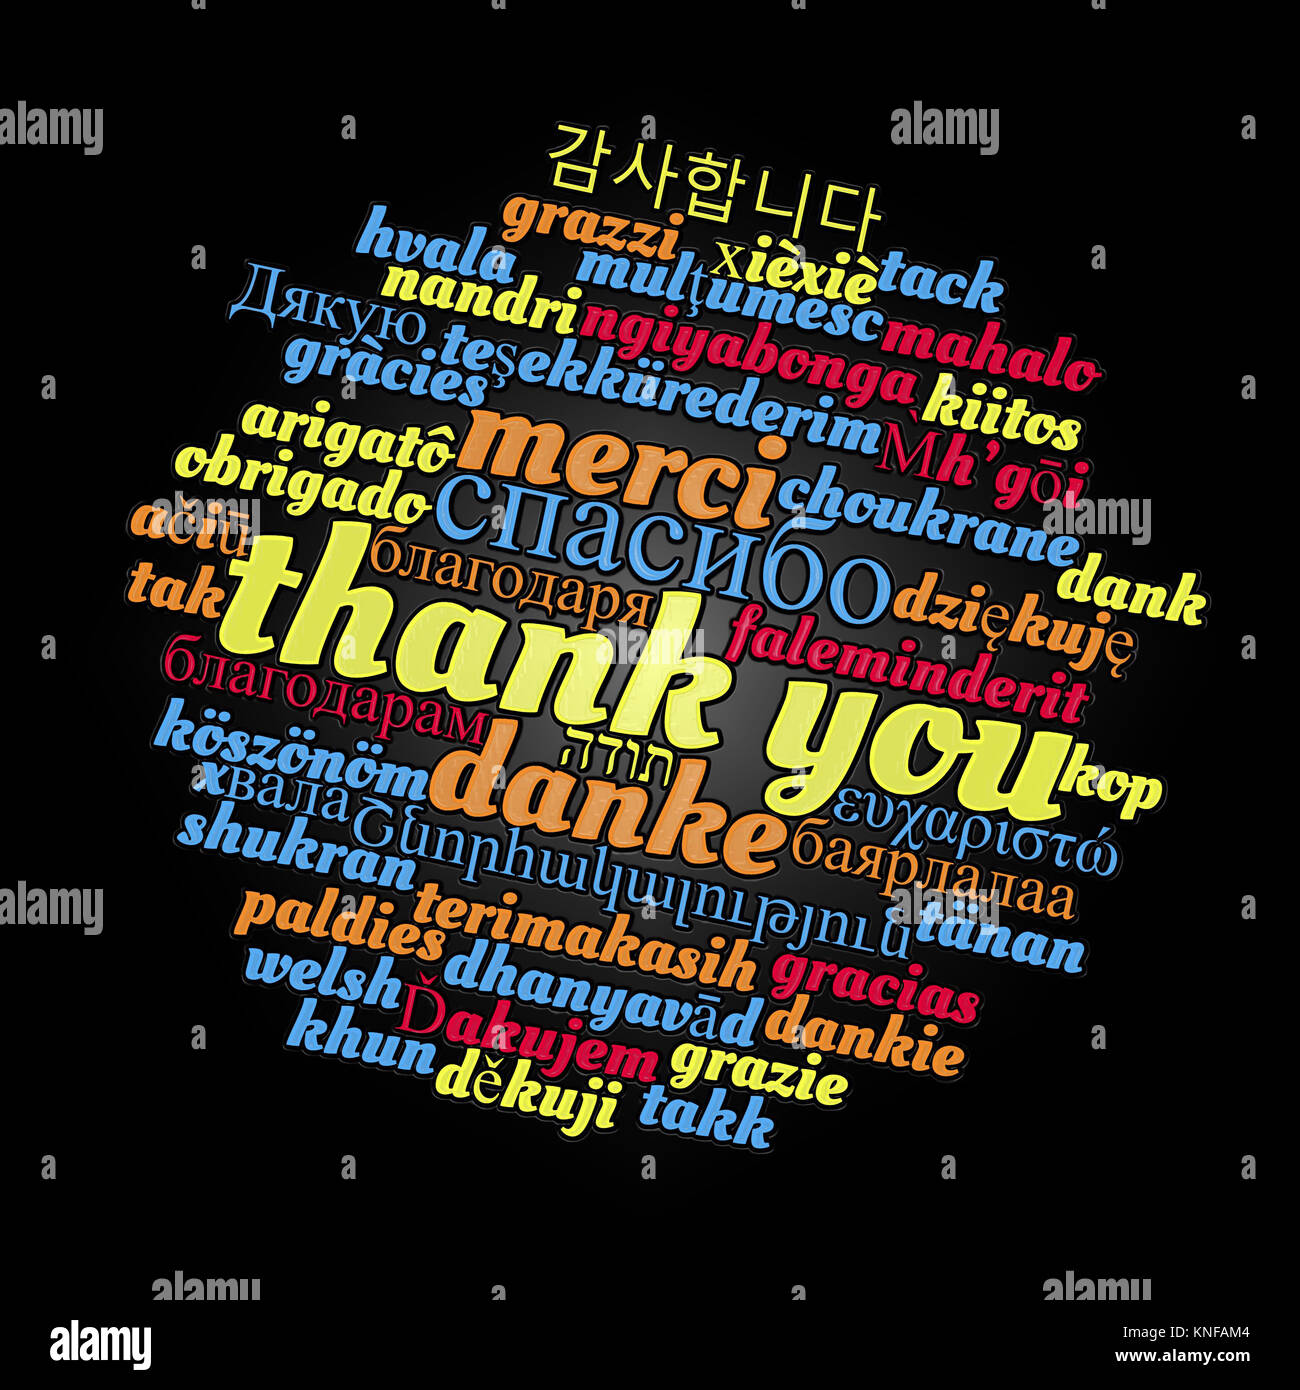 Thank you word cloud concept in different languages Stock Photo